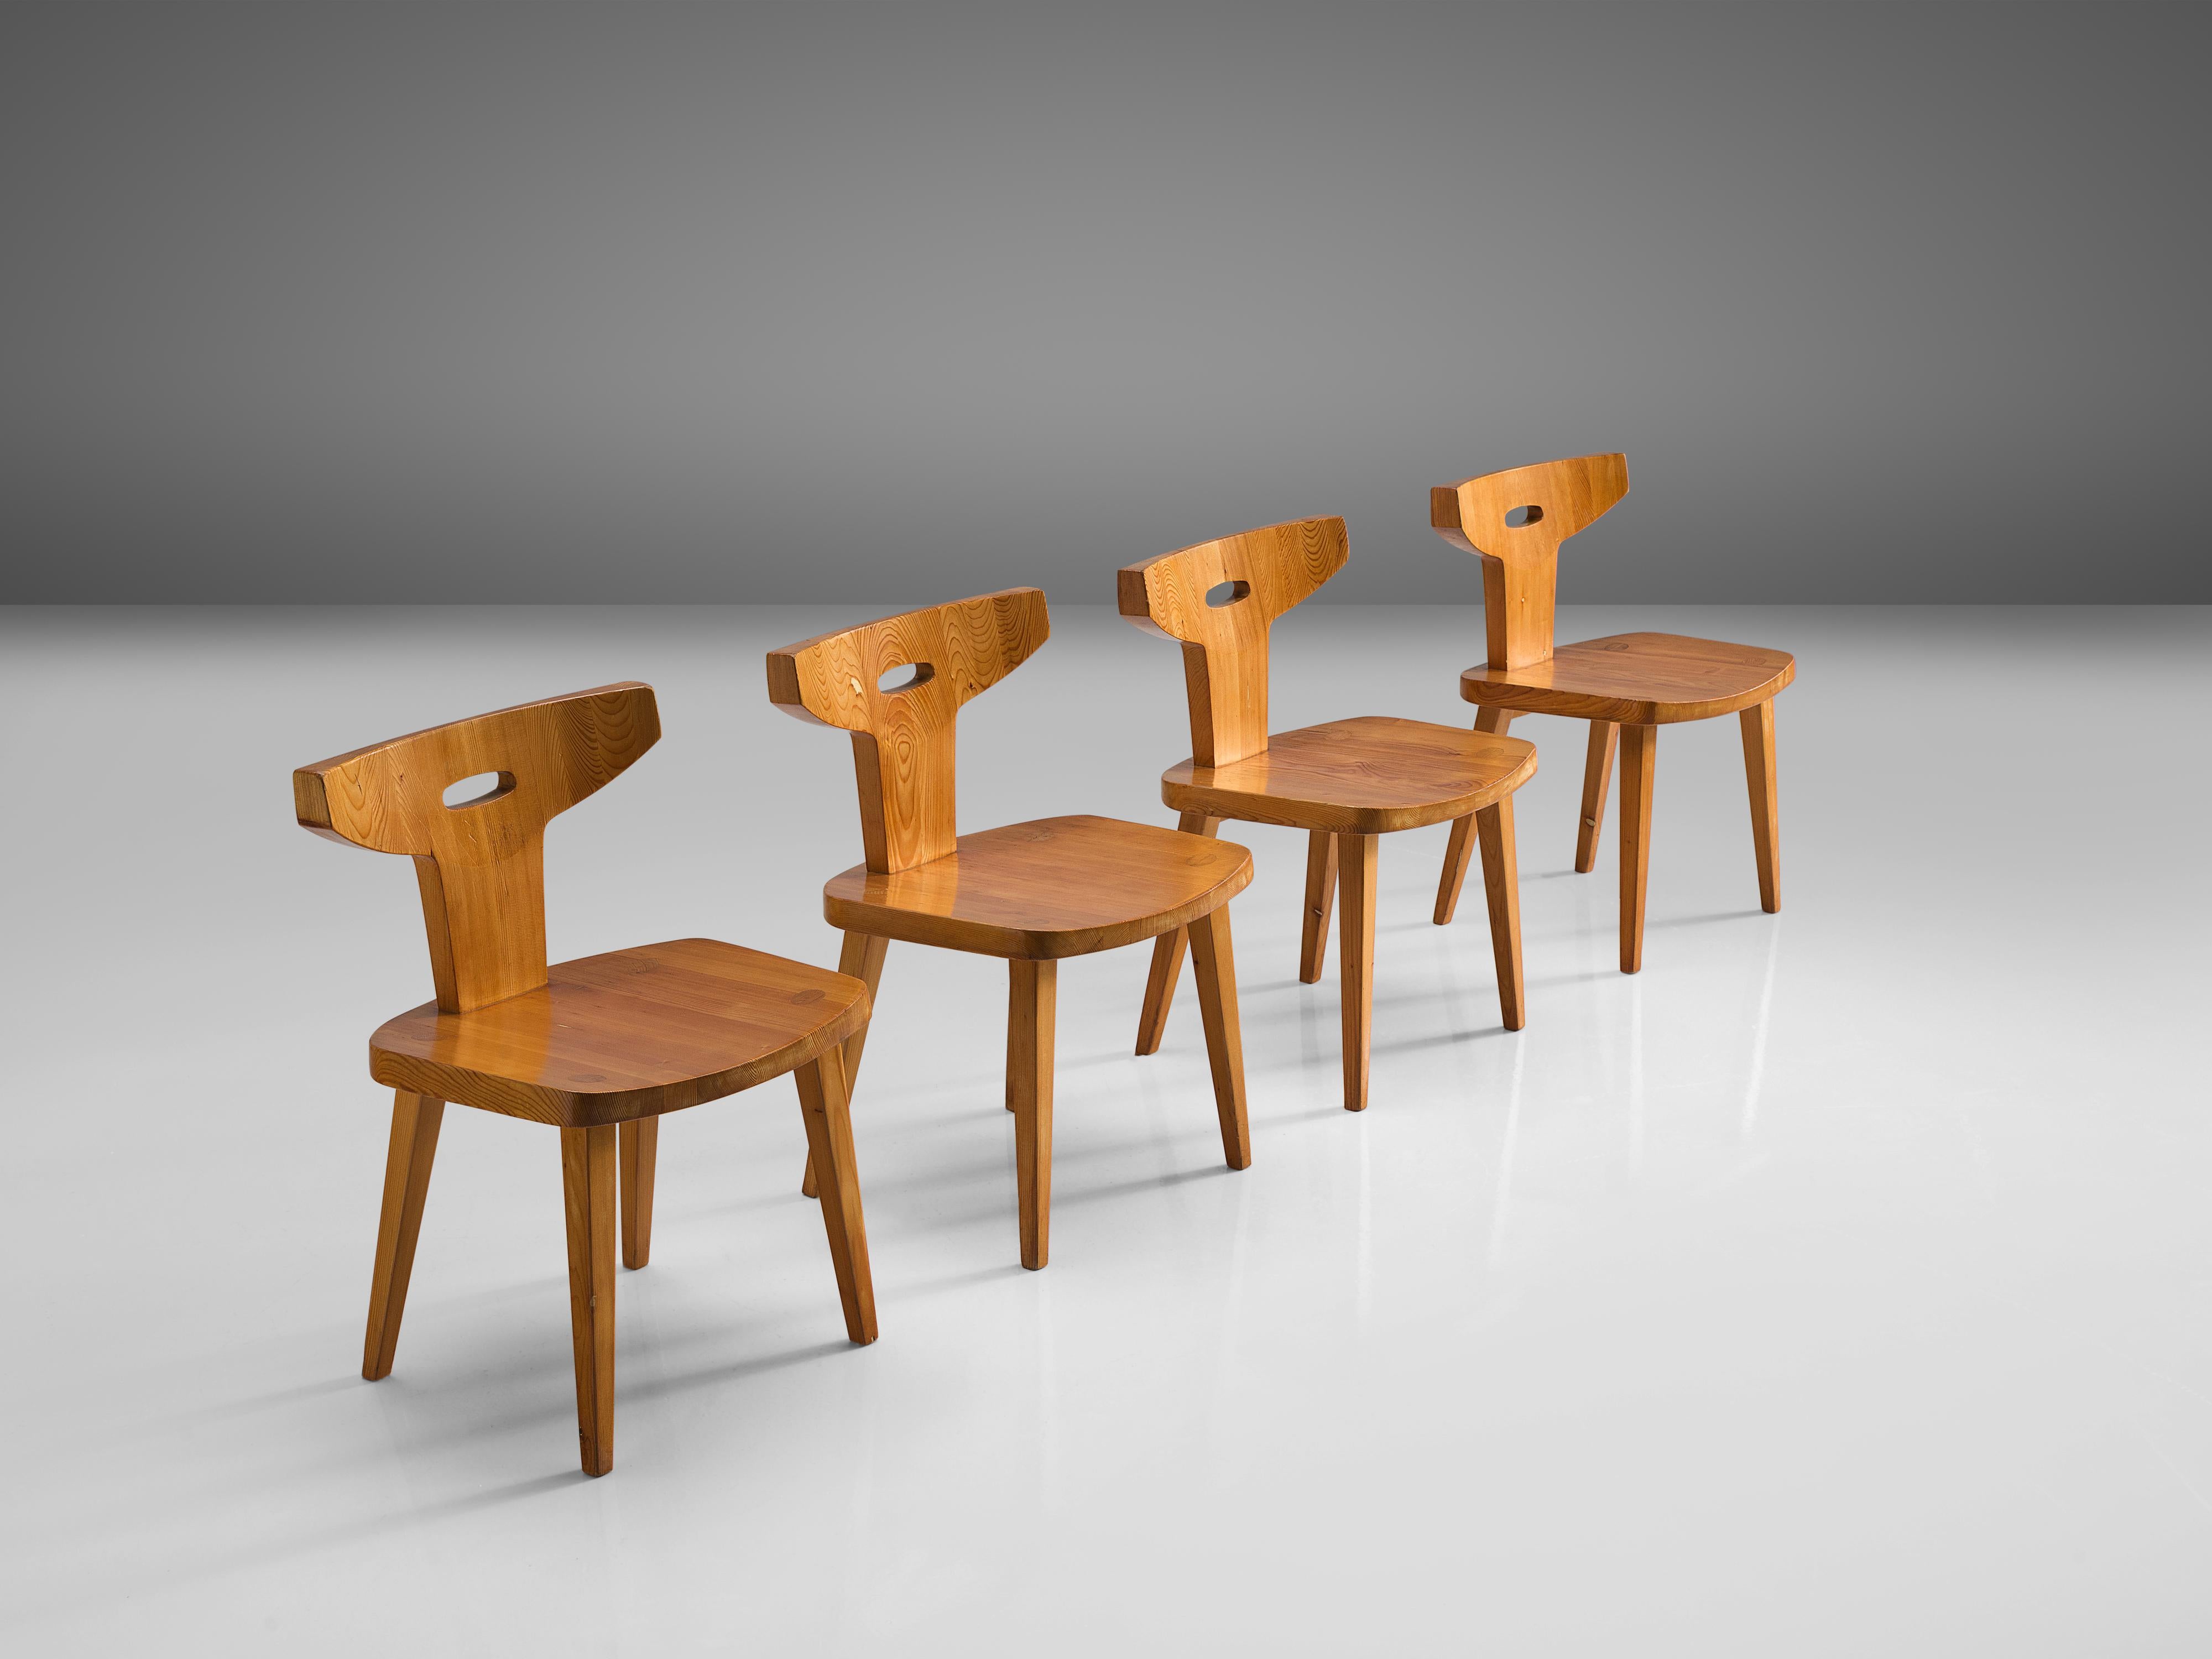 Danish Jacob Kielland-Brandt Set of Four Dining Chairs in Solid Pine